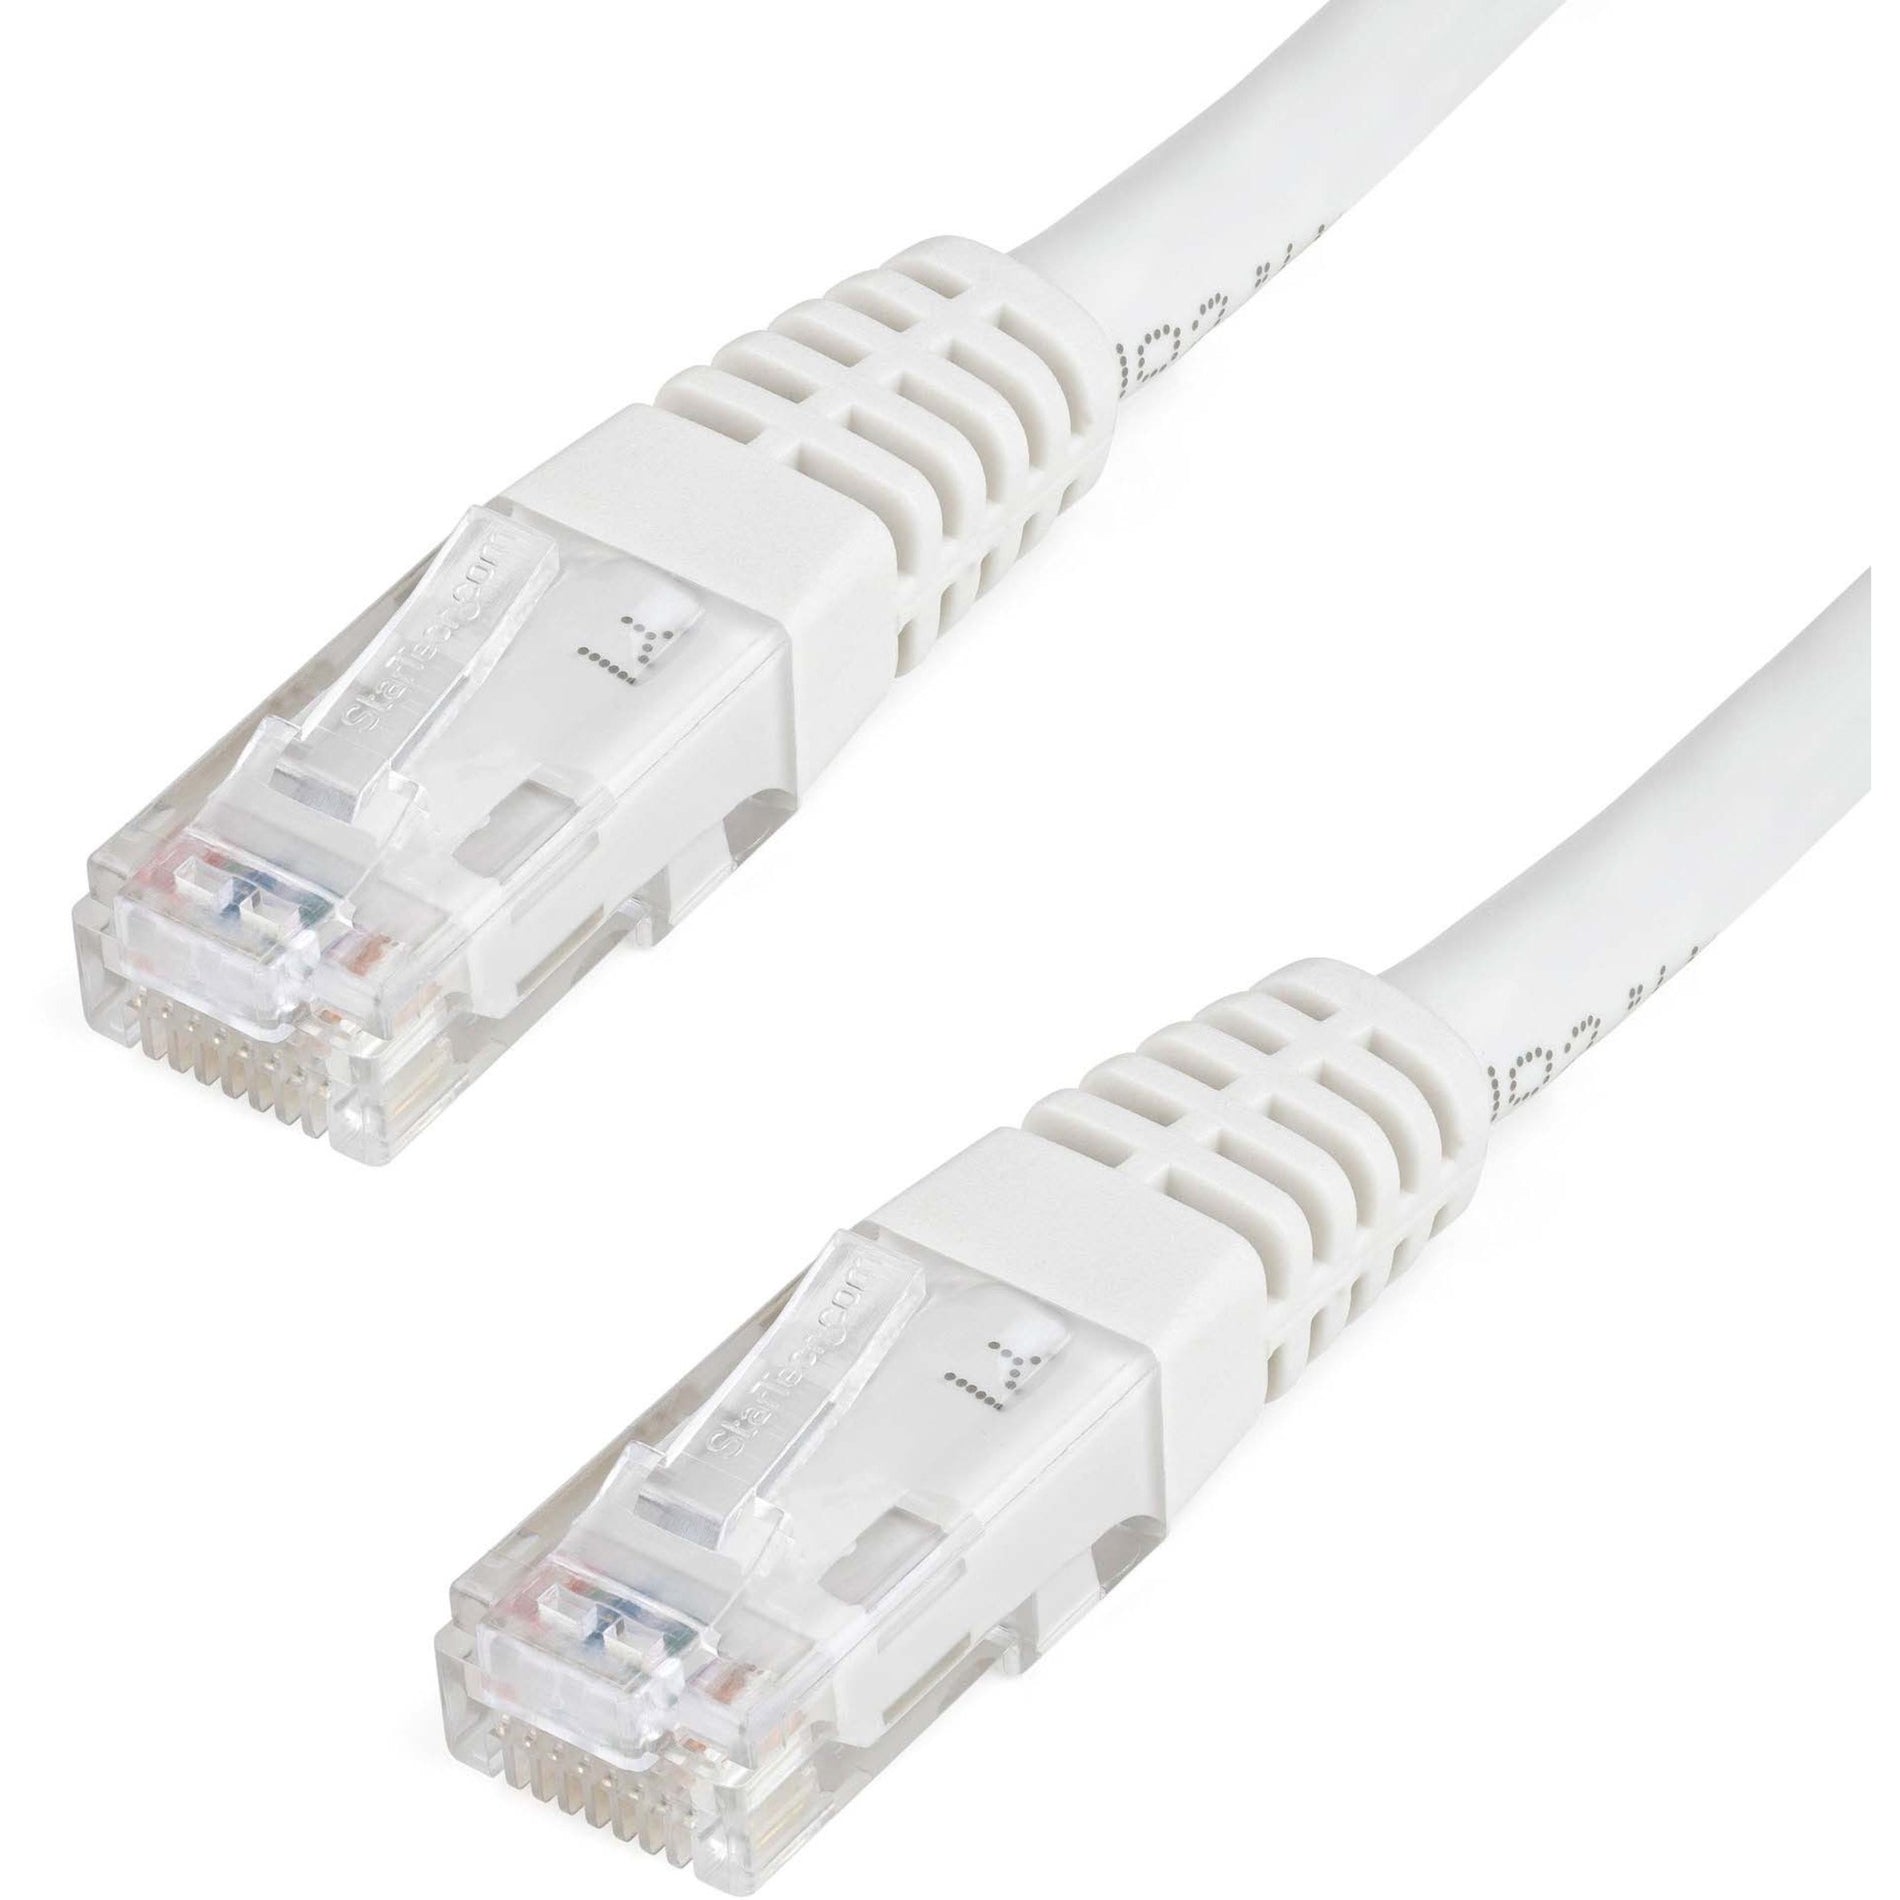 StarTech.com C6PATCH15WH 15ft White Cat6 UTP Patch Cable ETL Verified, 10 Gbit/s Data Transfer Rate, Gold Plated Connectors